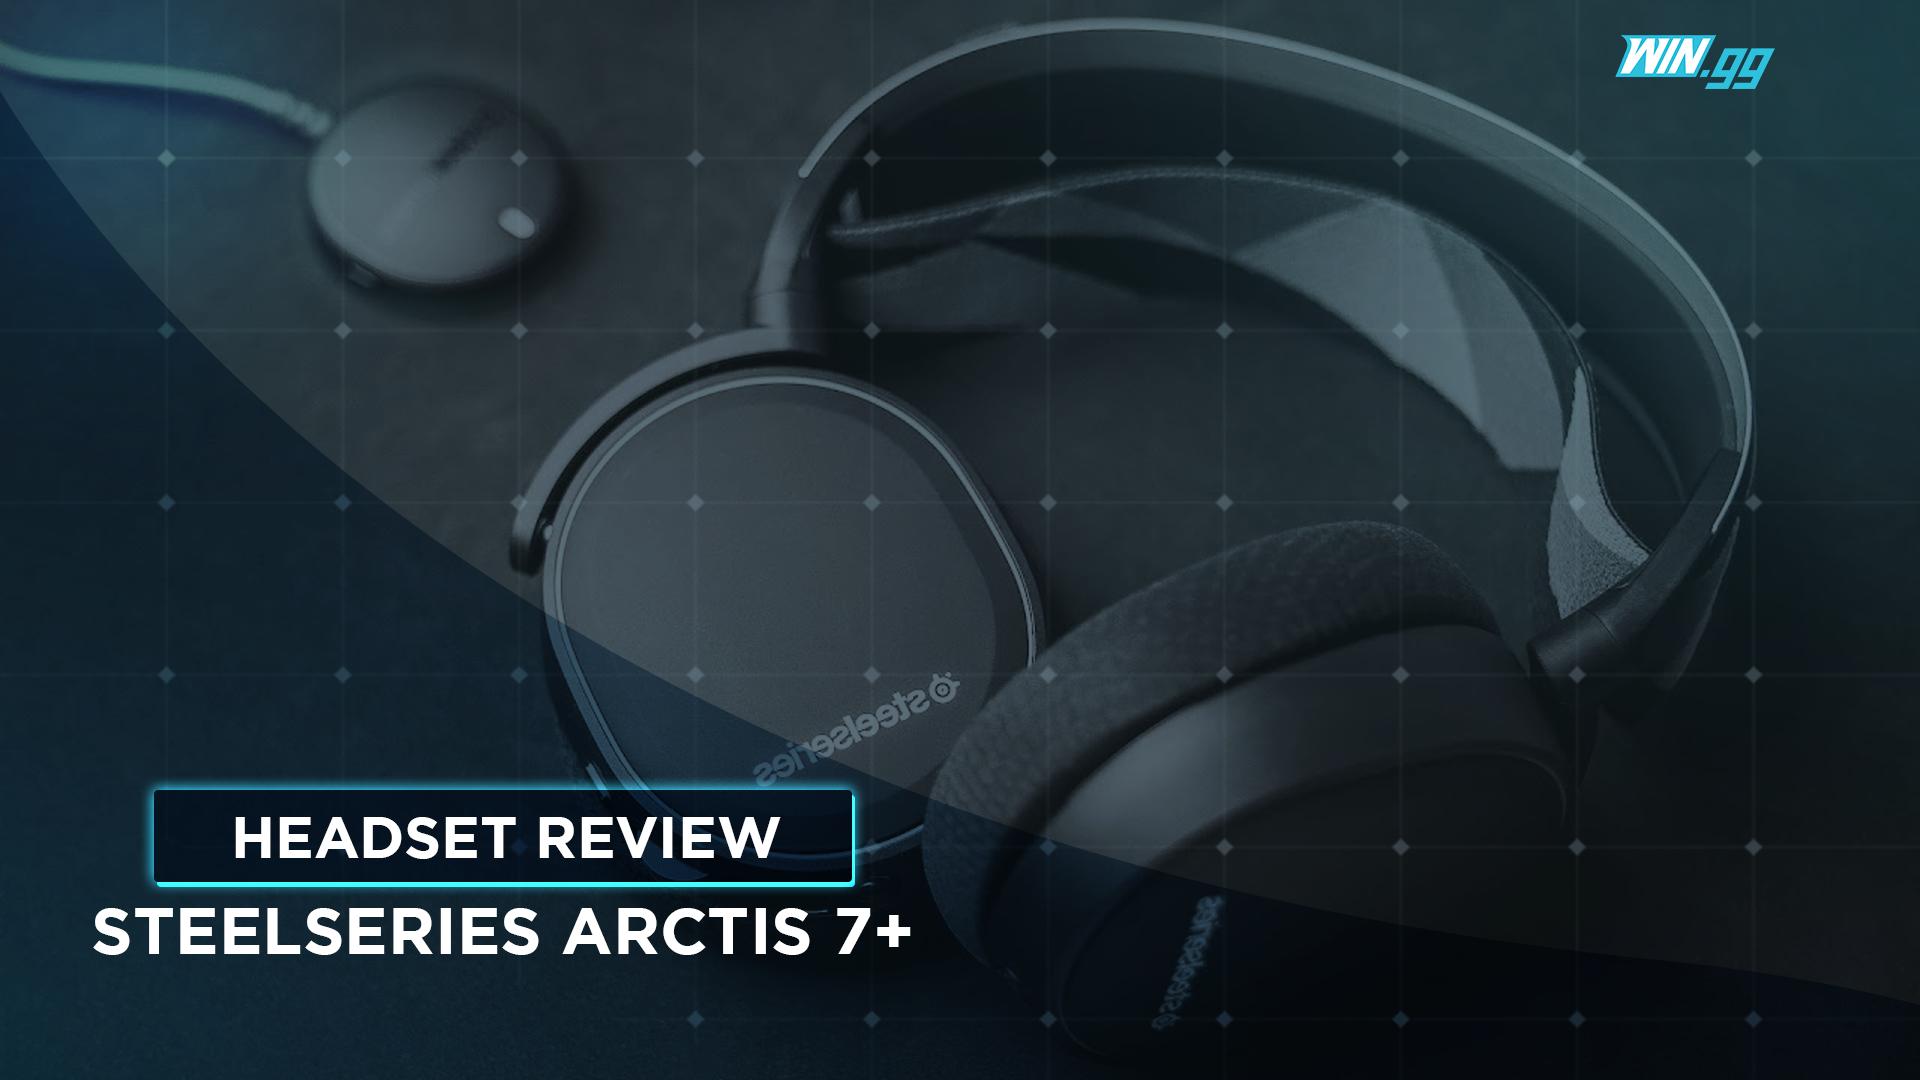 The New Features and Upgrades in Arctis 7+